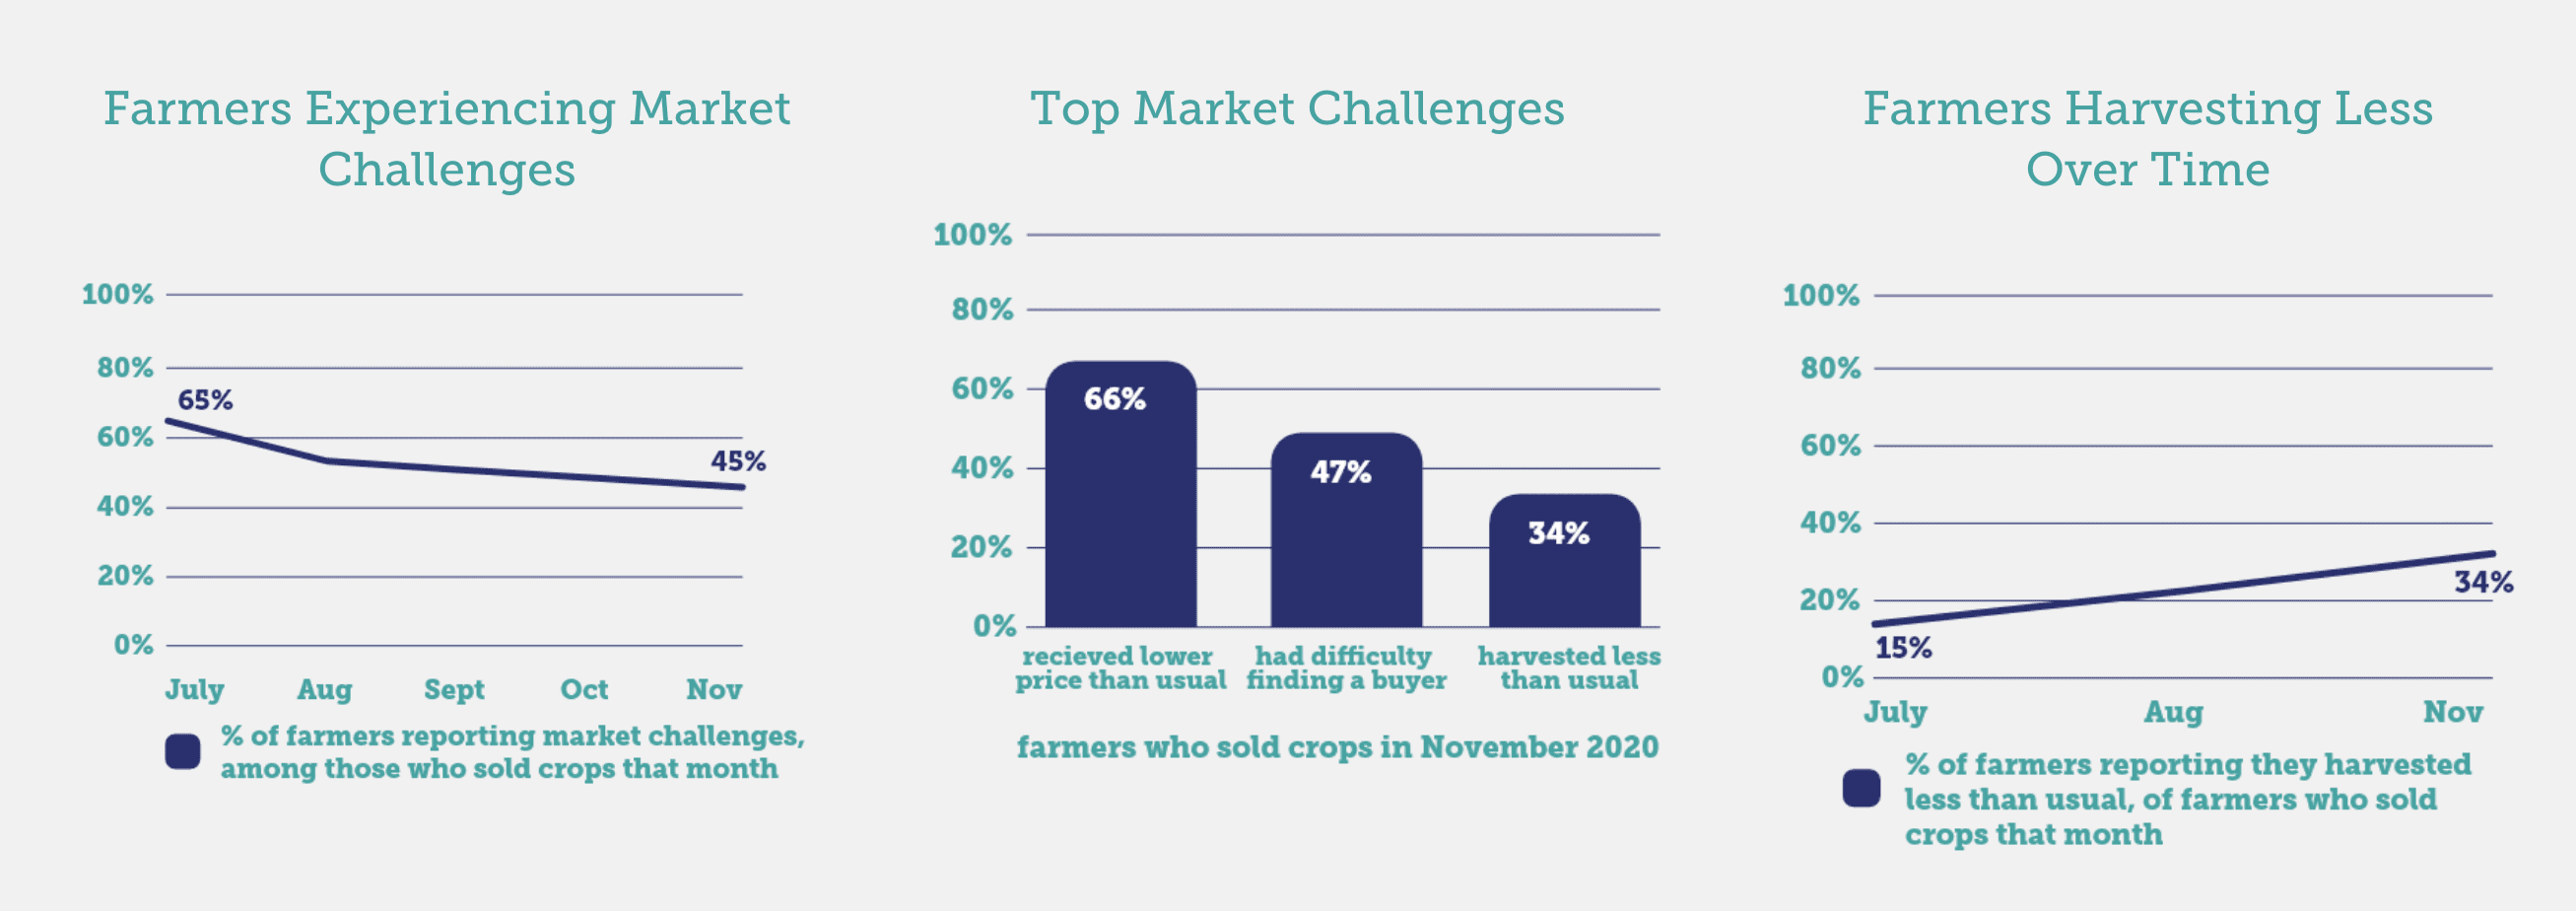 Charts show top market challenges farmers reported during the pandemic.